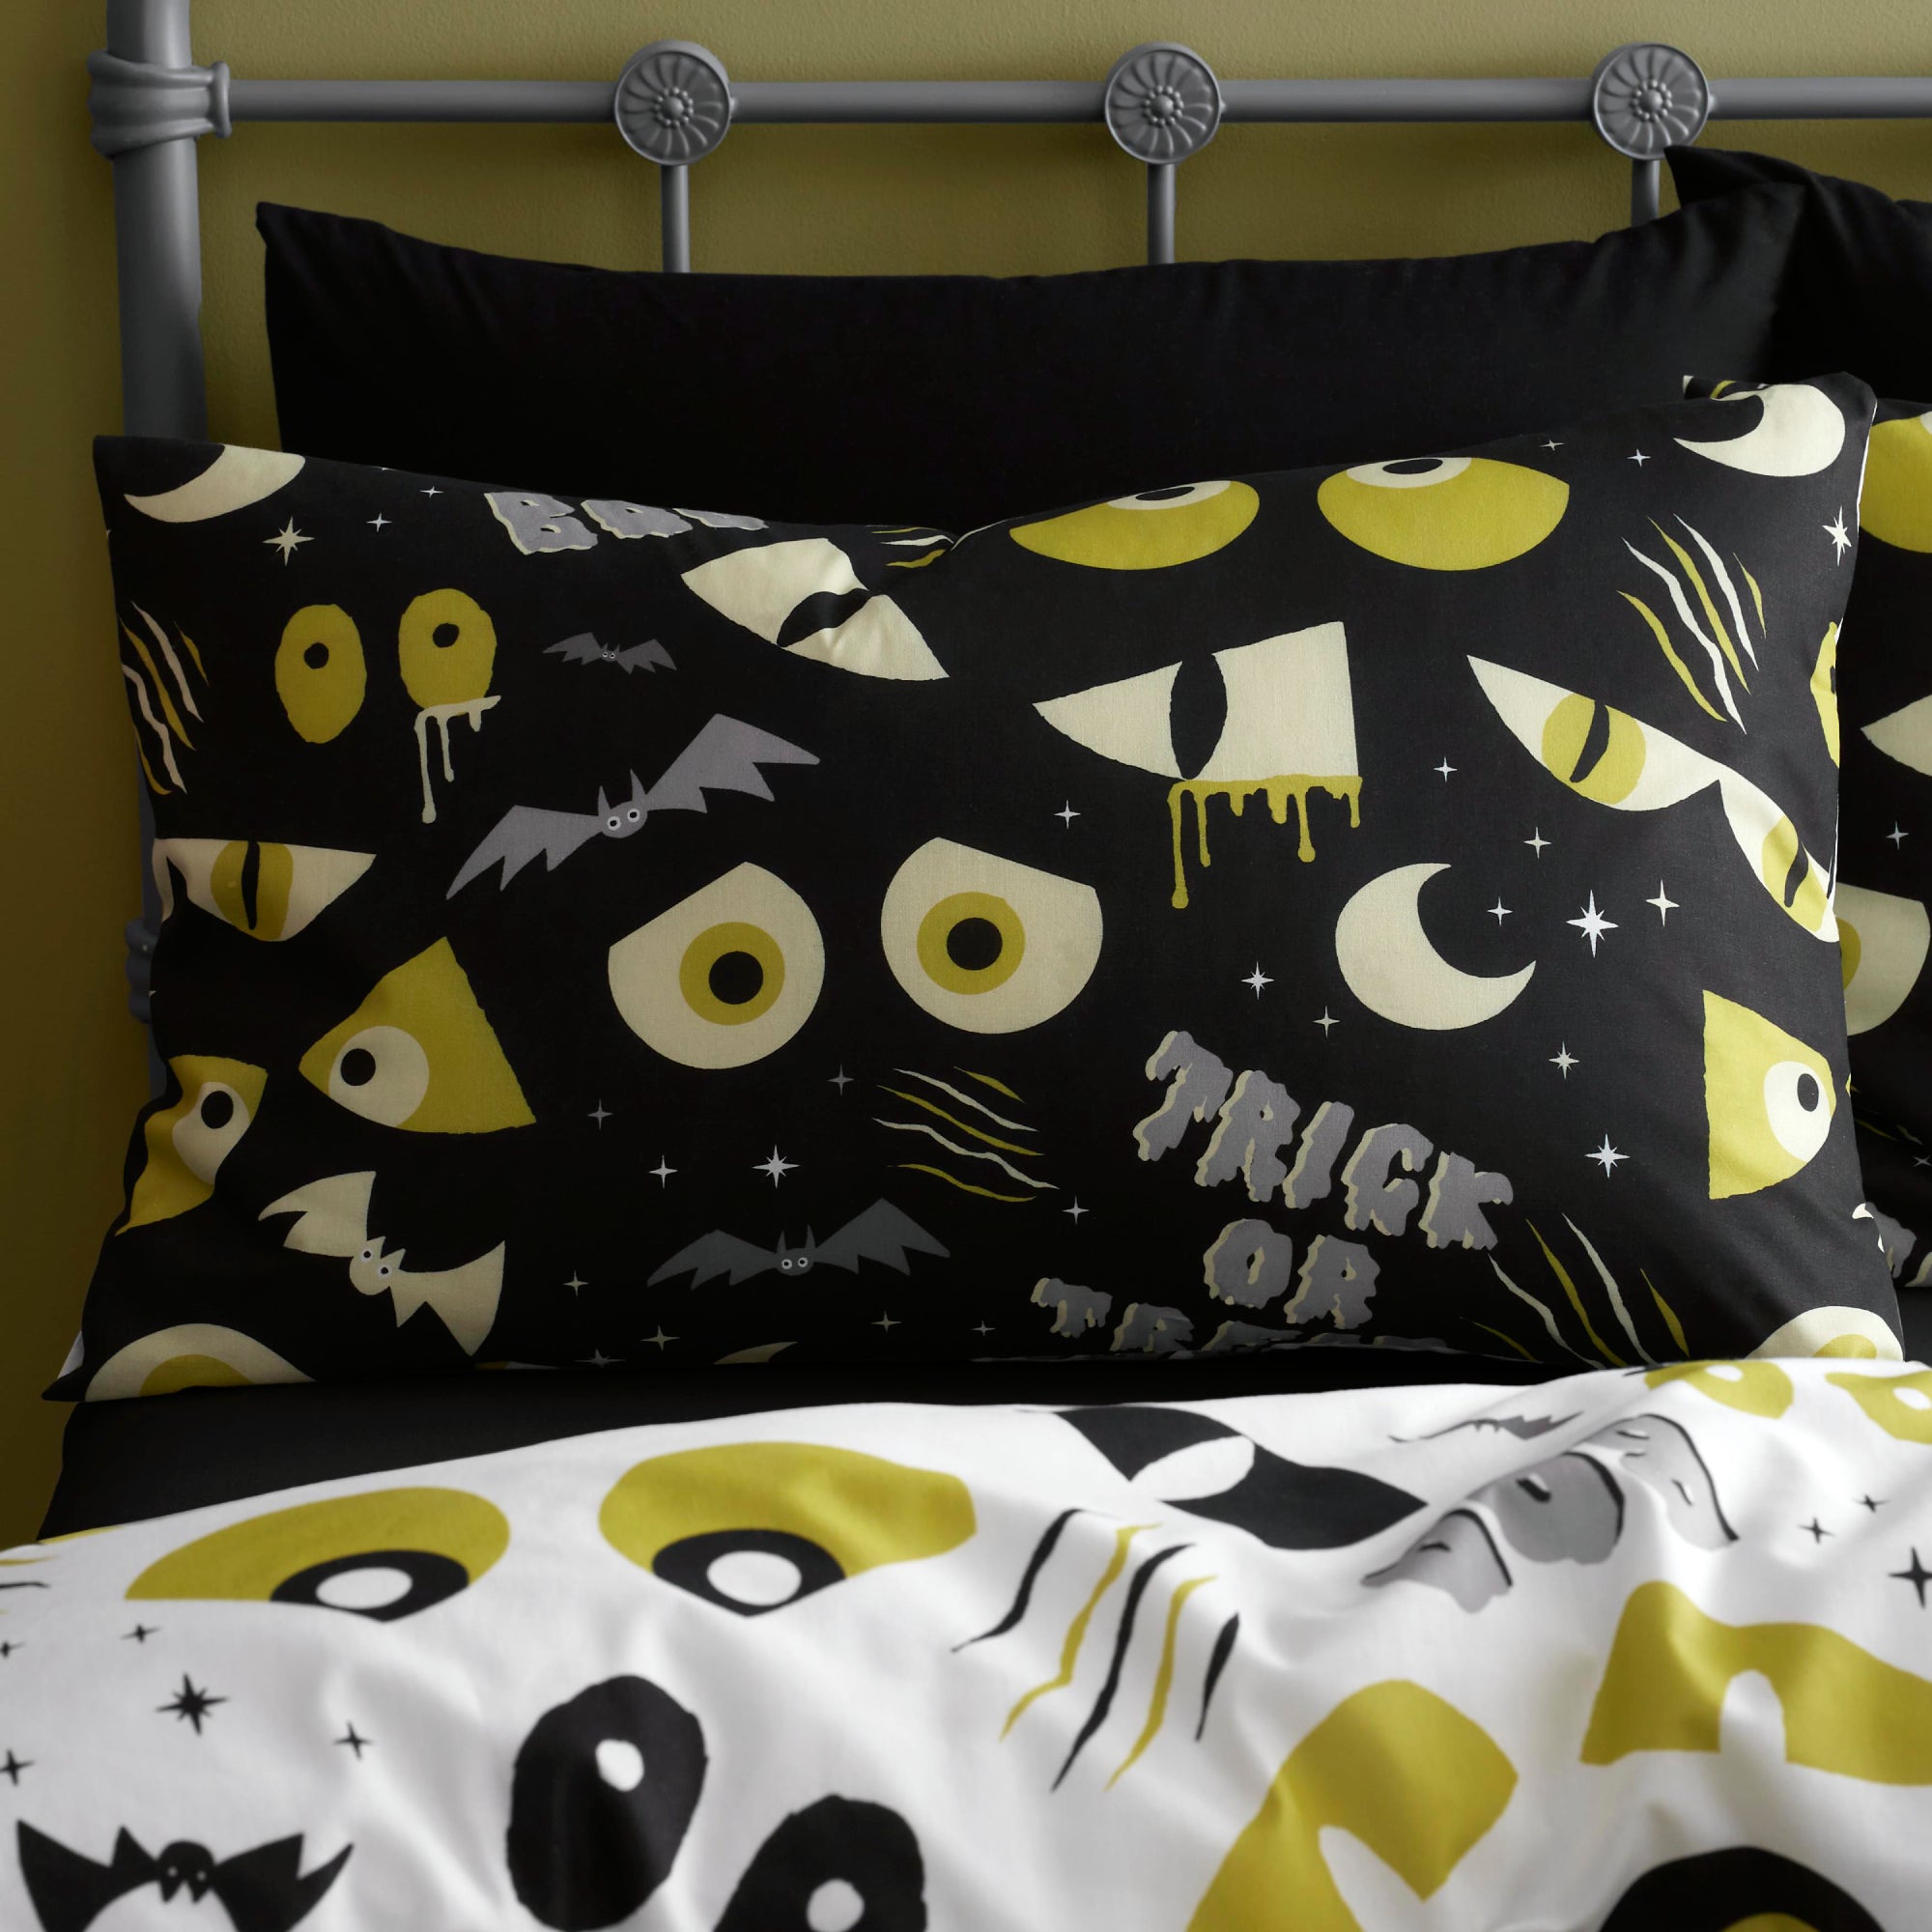 Duvet Cover Set Halloween Trick or Treat by Bedlam in Black